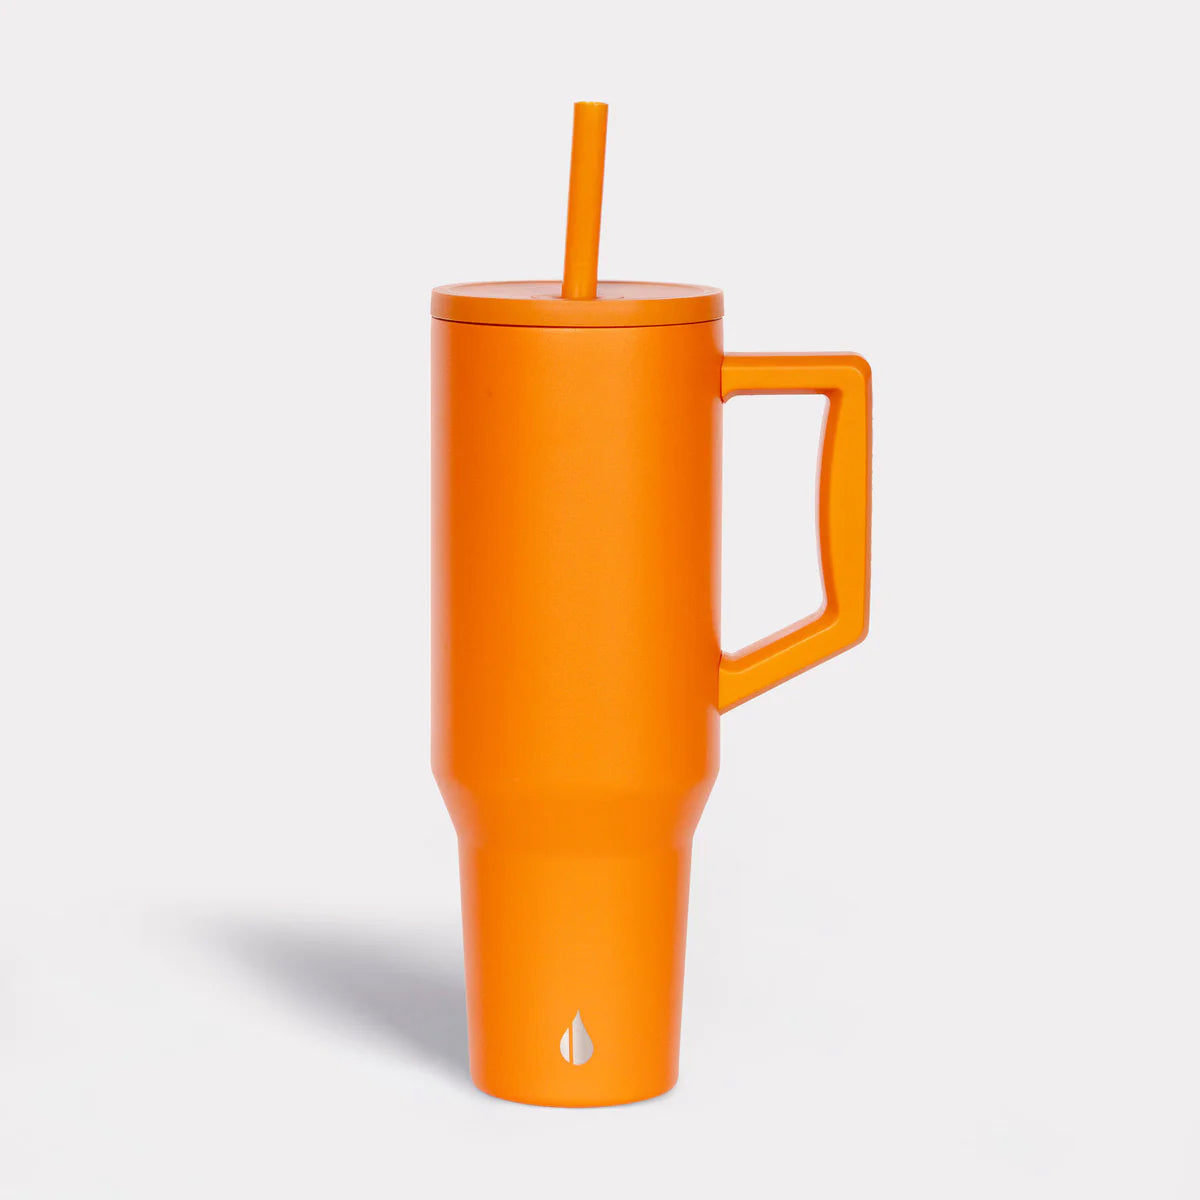 Customized Elemental 40 oz stainless steel tumbler with interchangeable straws in orange.